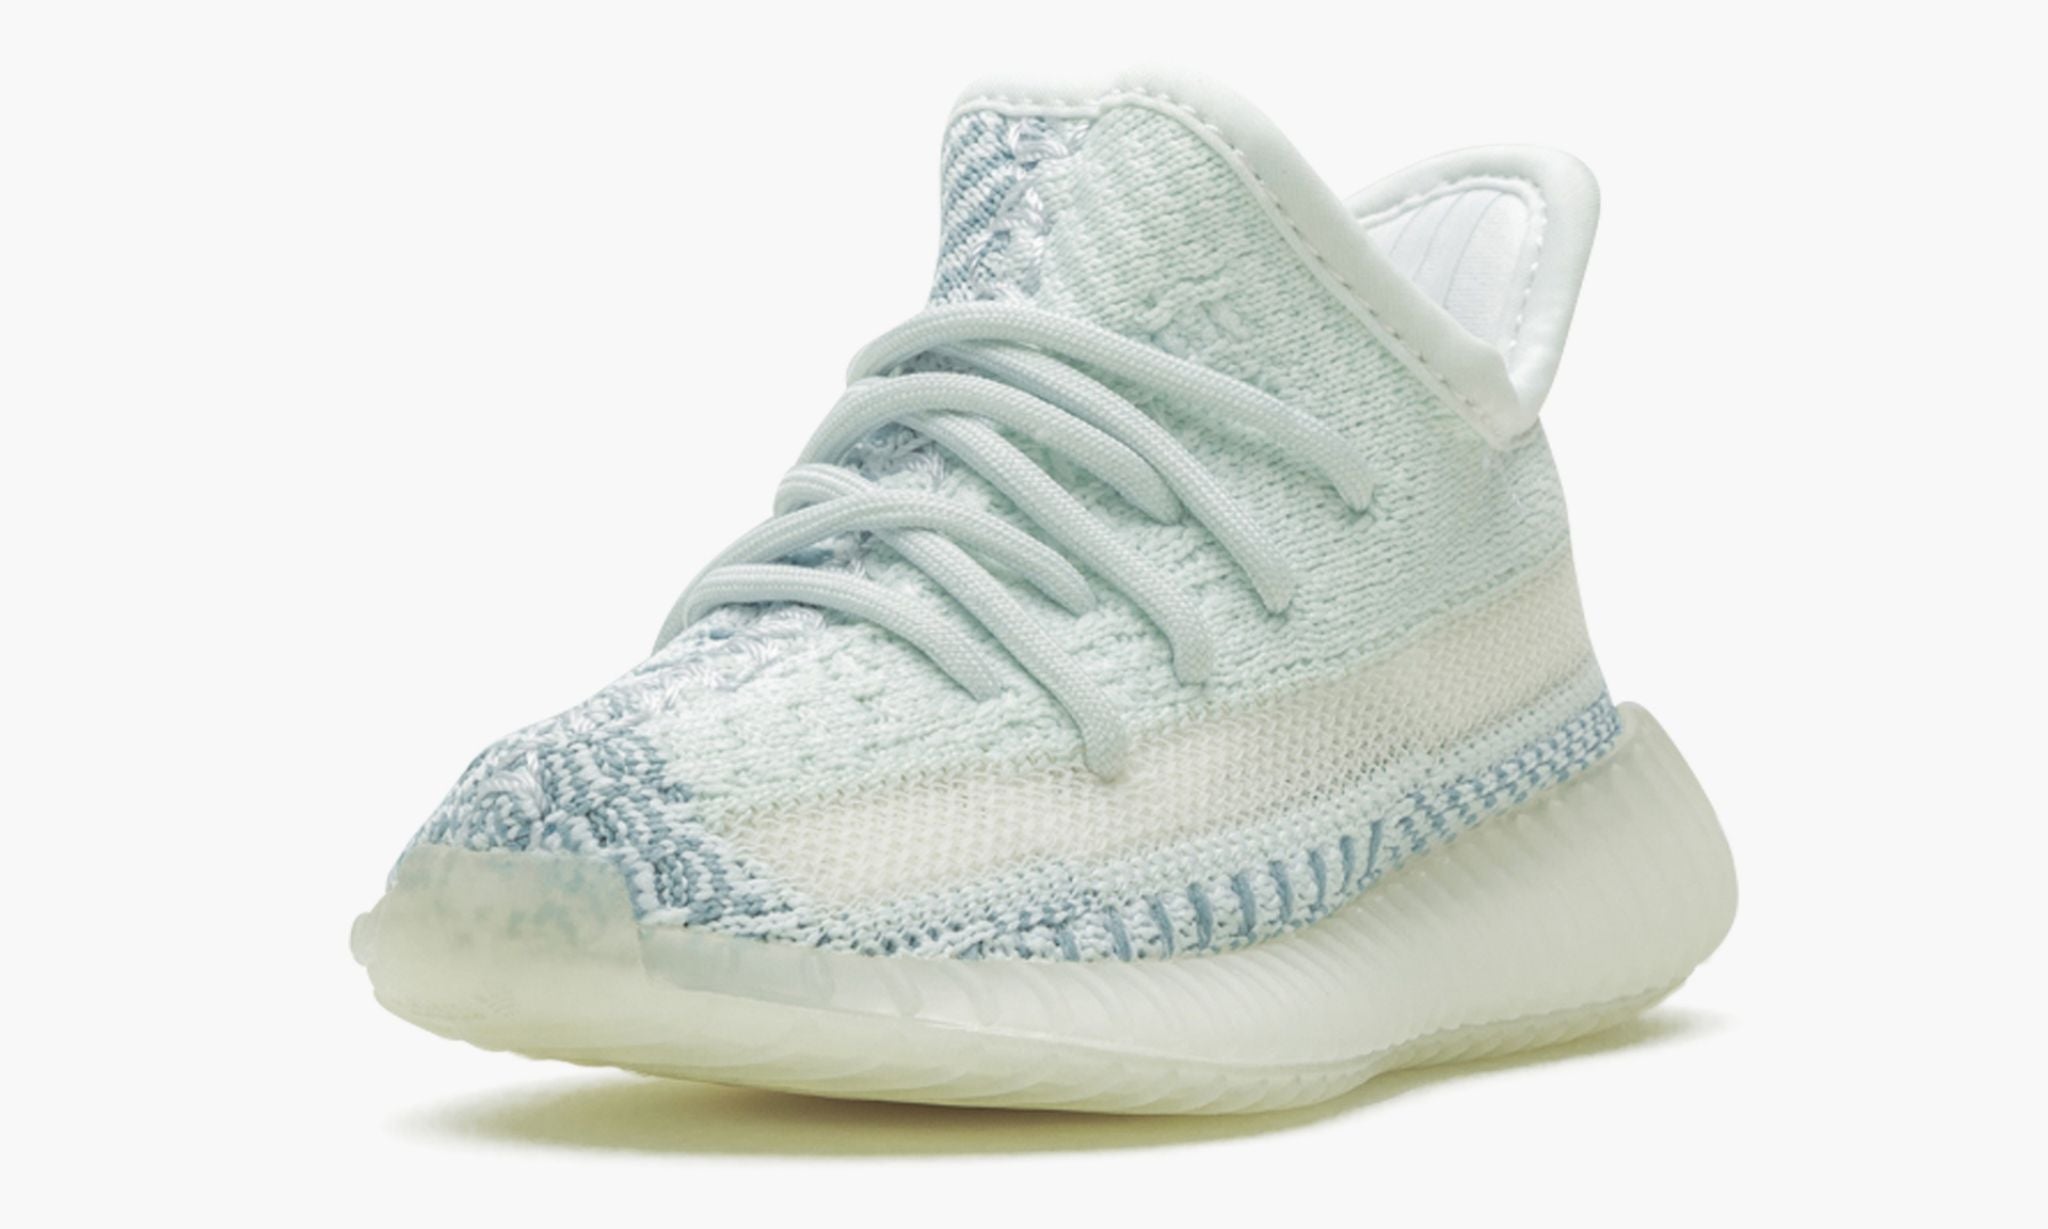 Adidas Yeezy Boost 350 V2 Cloud White (Infant)